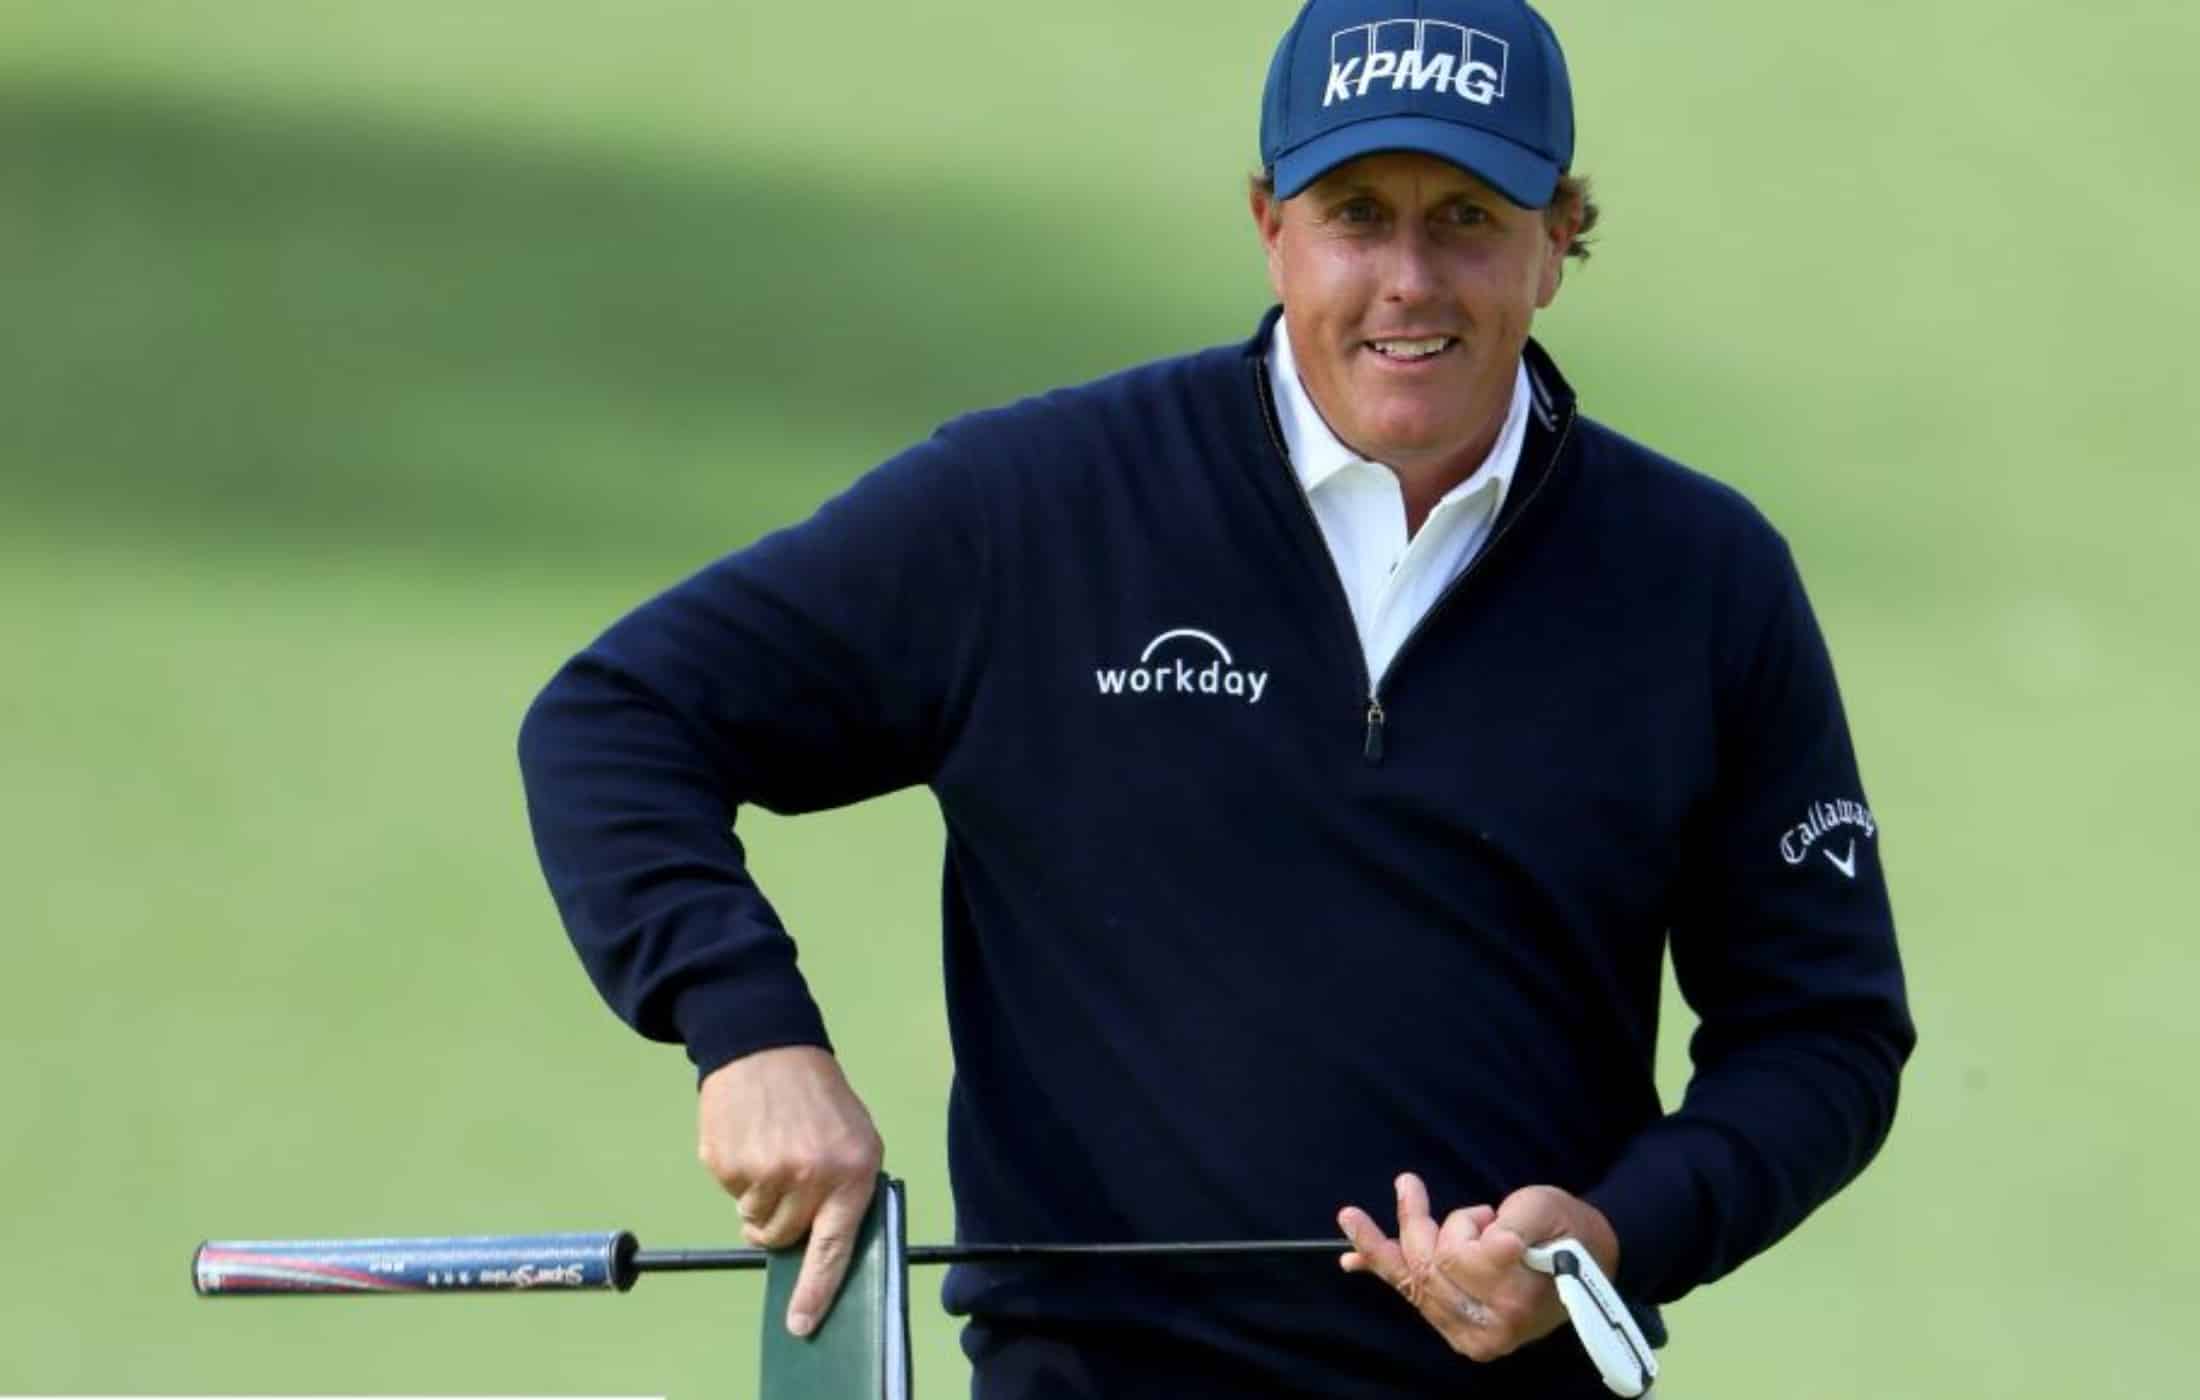 Phil Mickelson Net Worth $300 Mill - The Most Professional Golfer